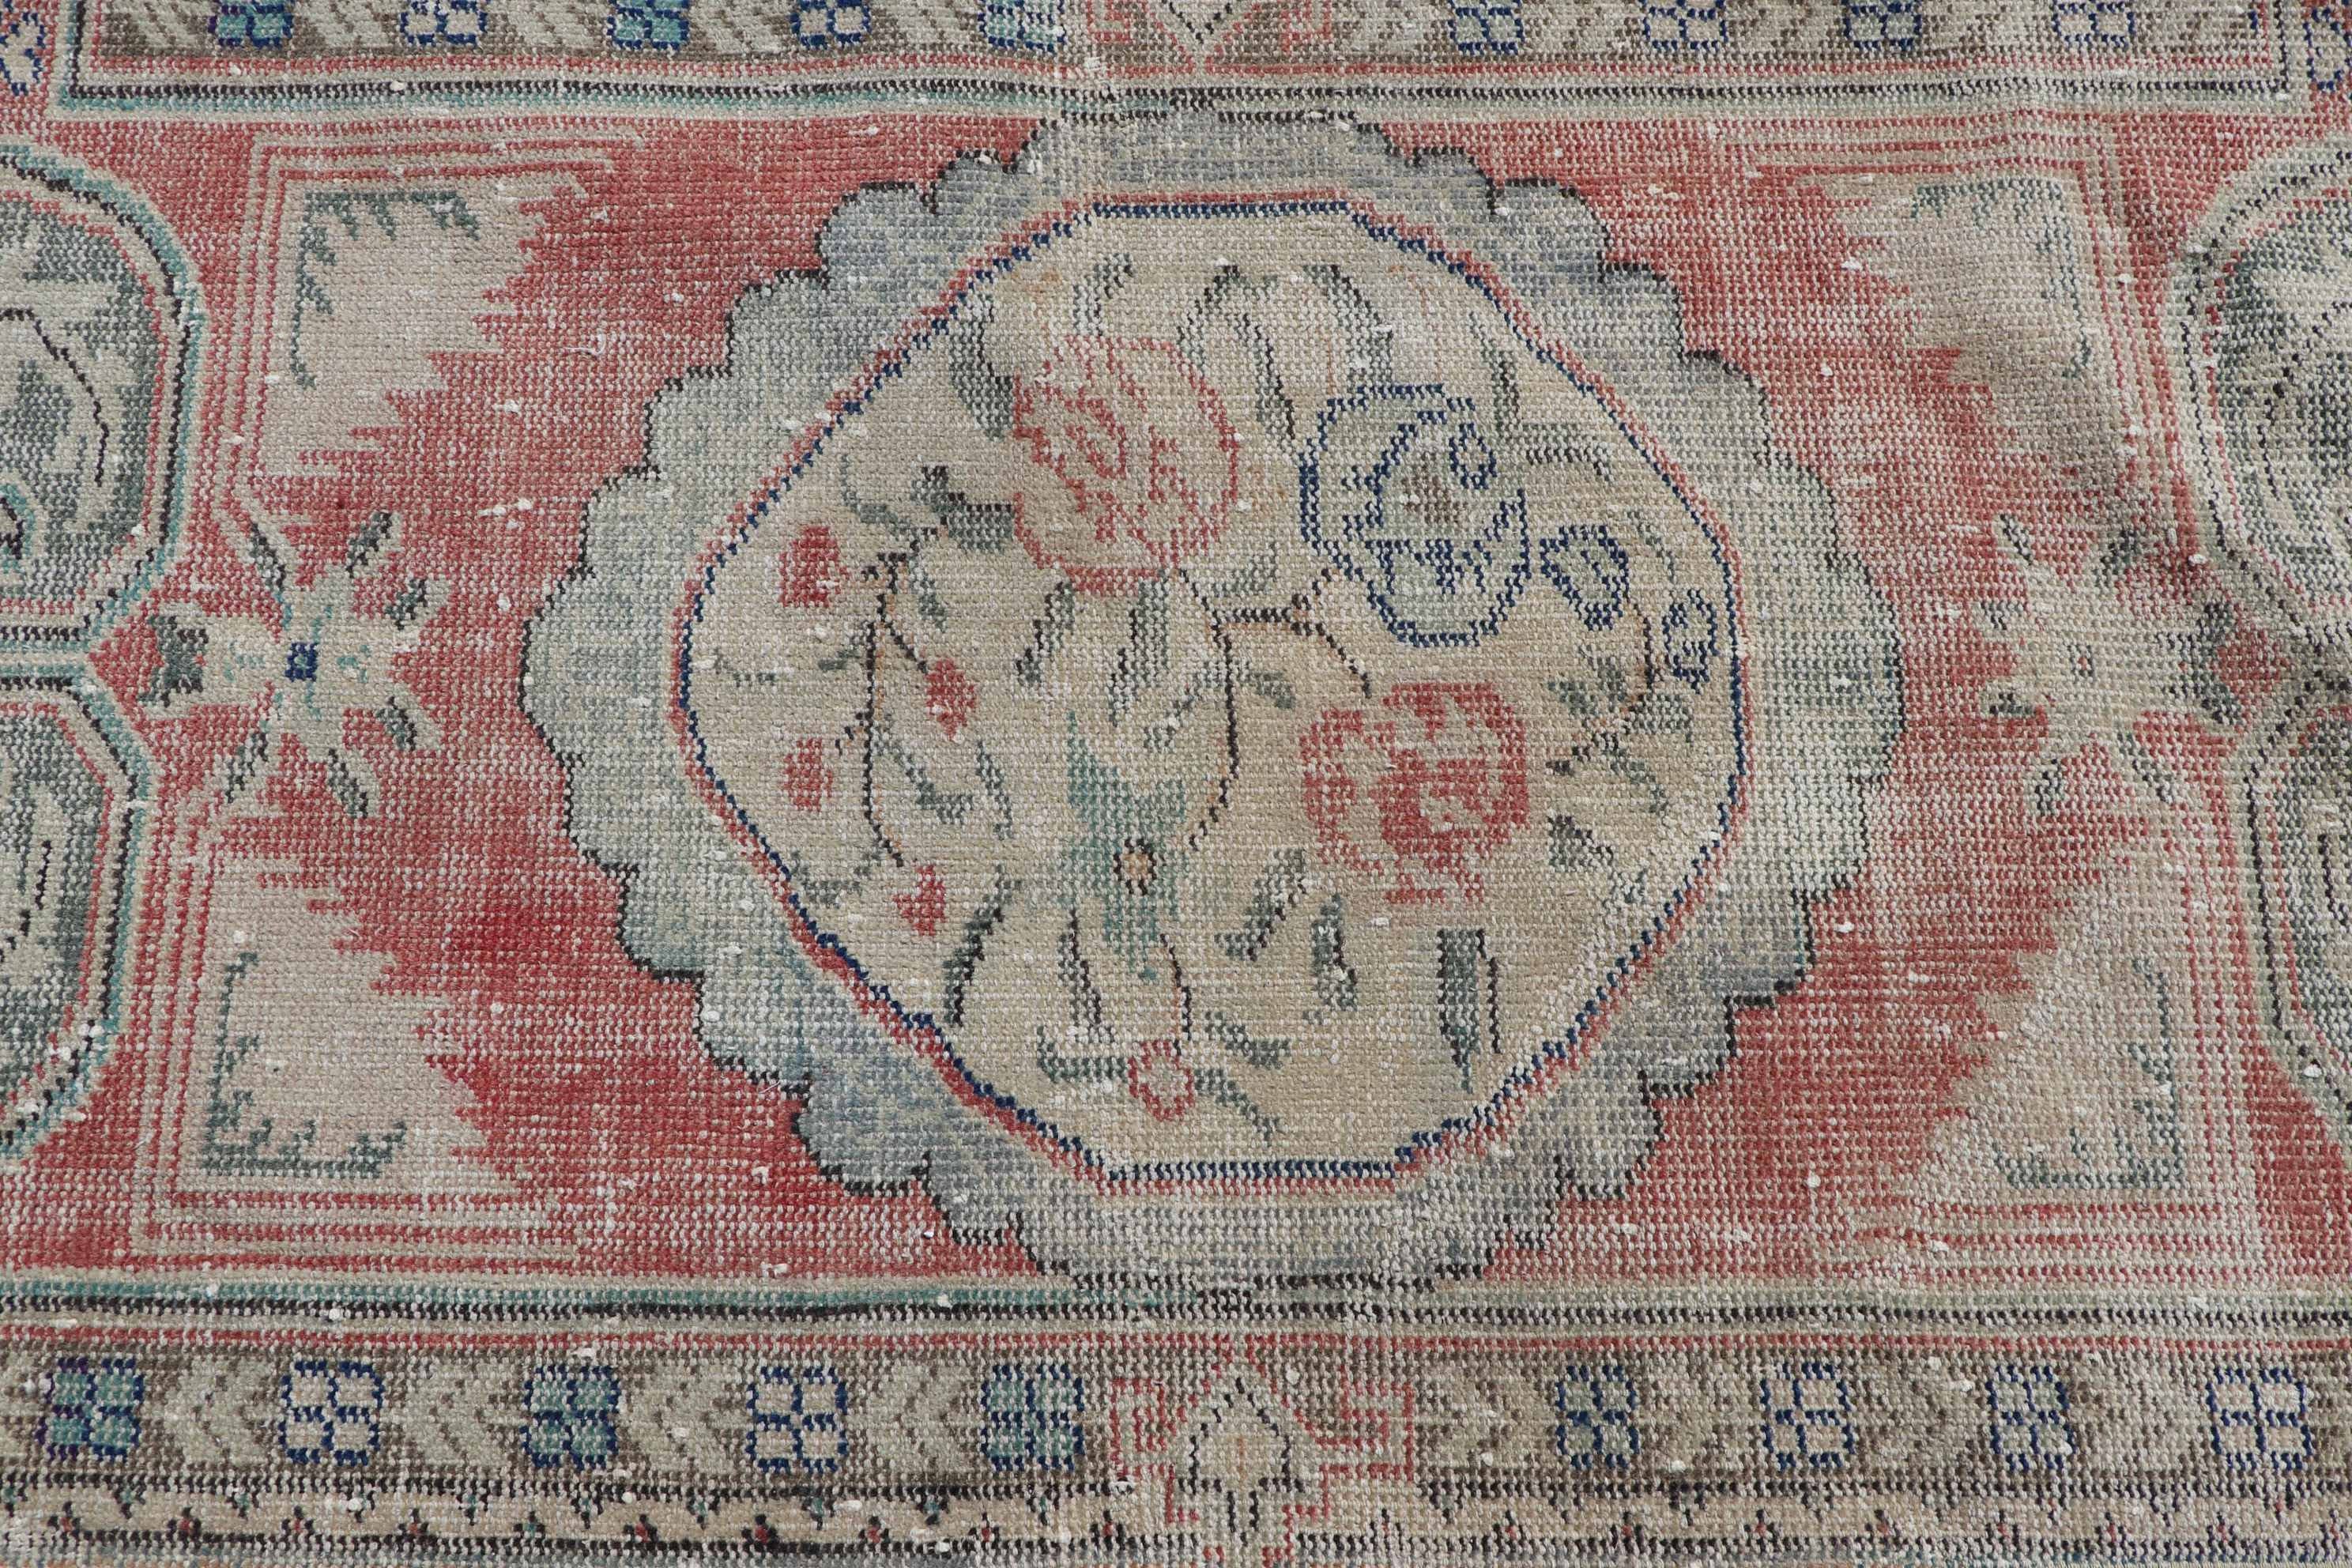 Rugs for Bedroom, Oushak Rug, Vintage Rug, Home Decor Rug, Bedroom Rug, Turkish Rugs, 2.9x4.8 ft Small Rug, Red Cool Rug, Entry Rugs